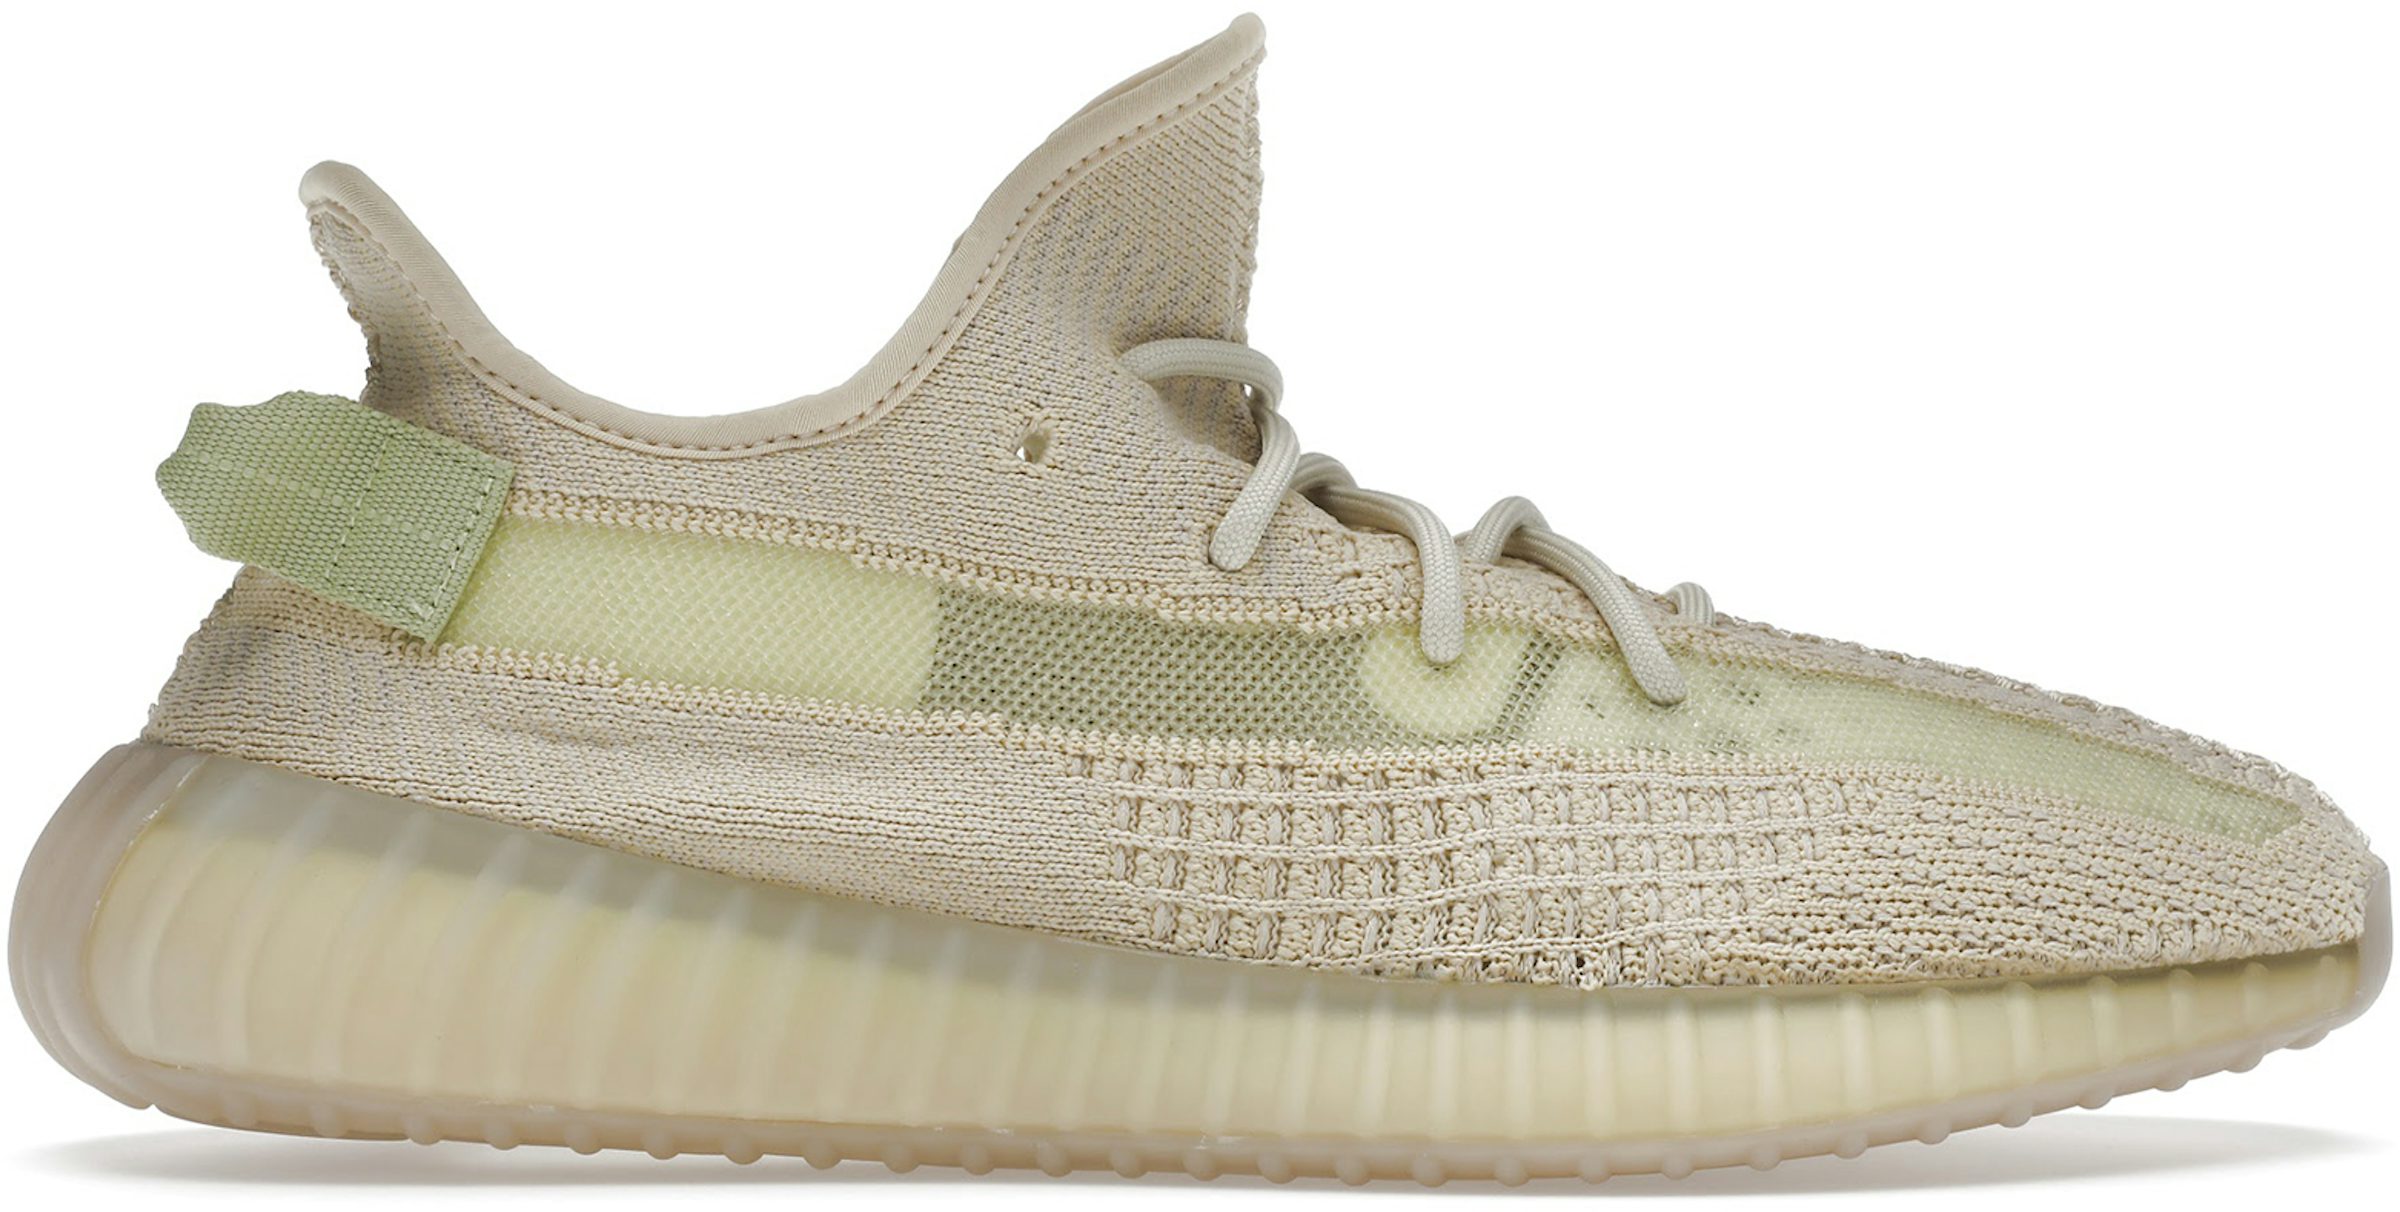 Buy Adidas Yeezy Boost 350 V2 x Supreme womens - Hot / limited